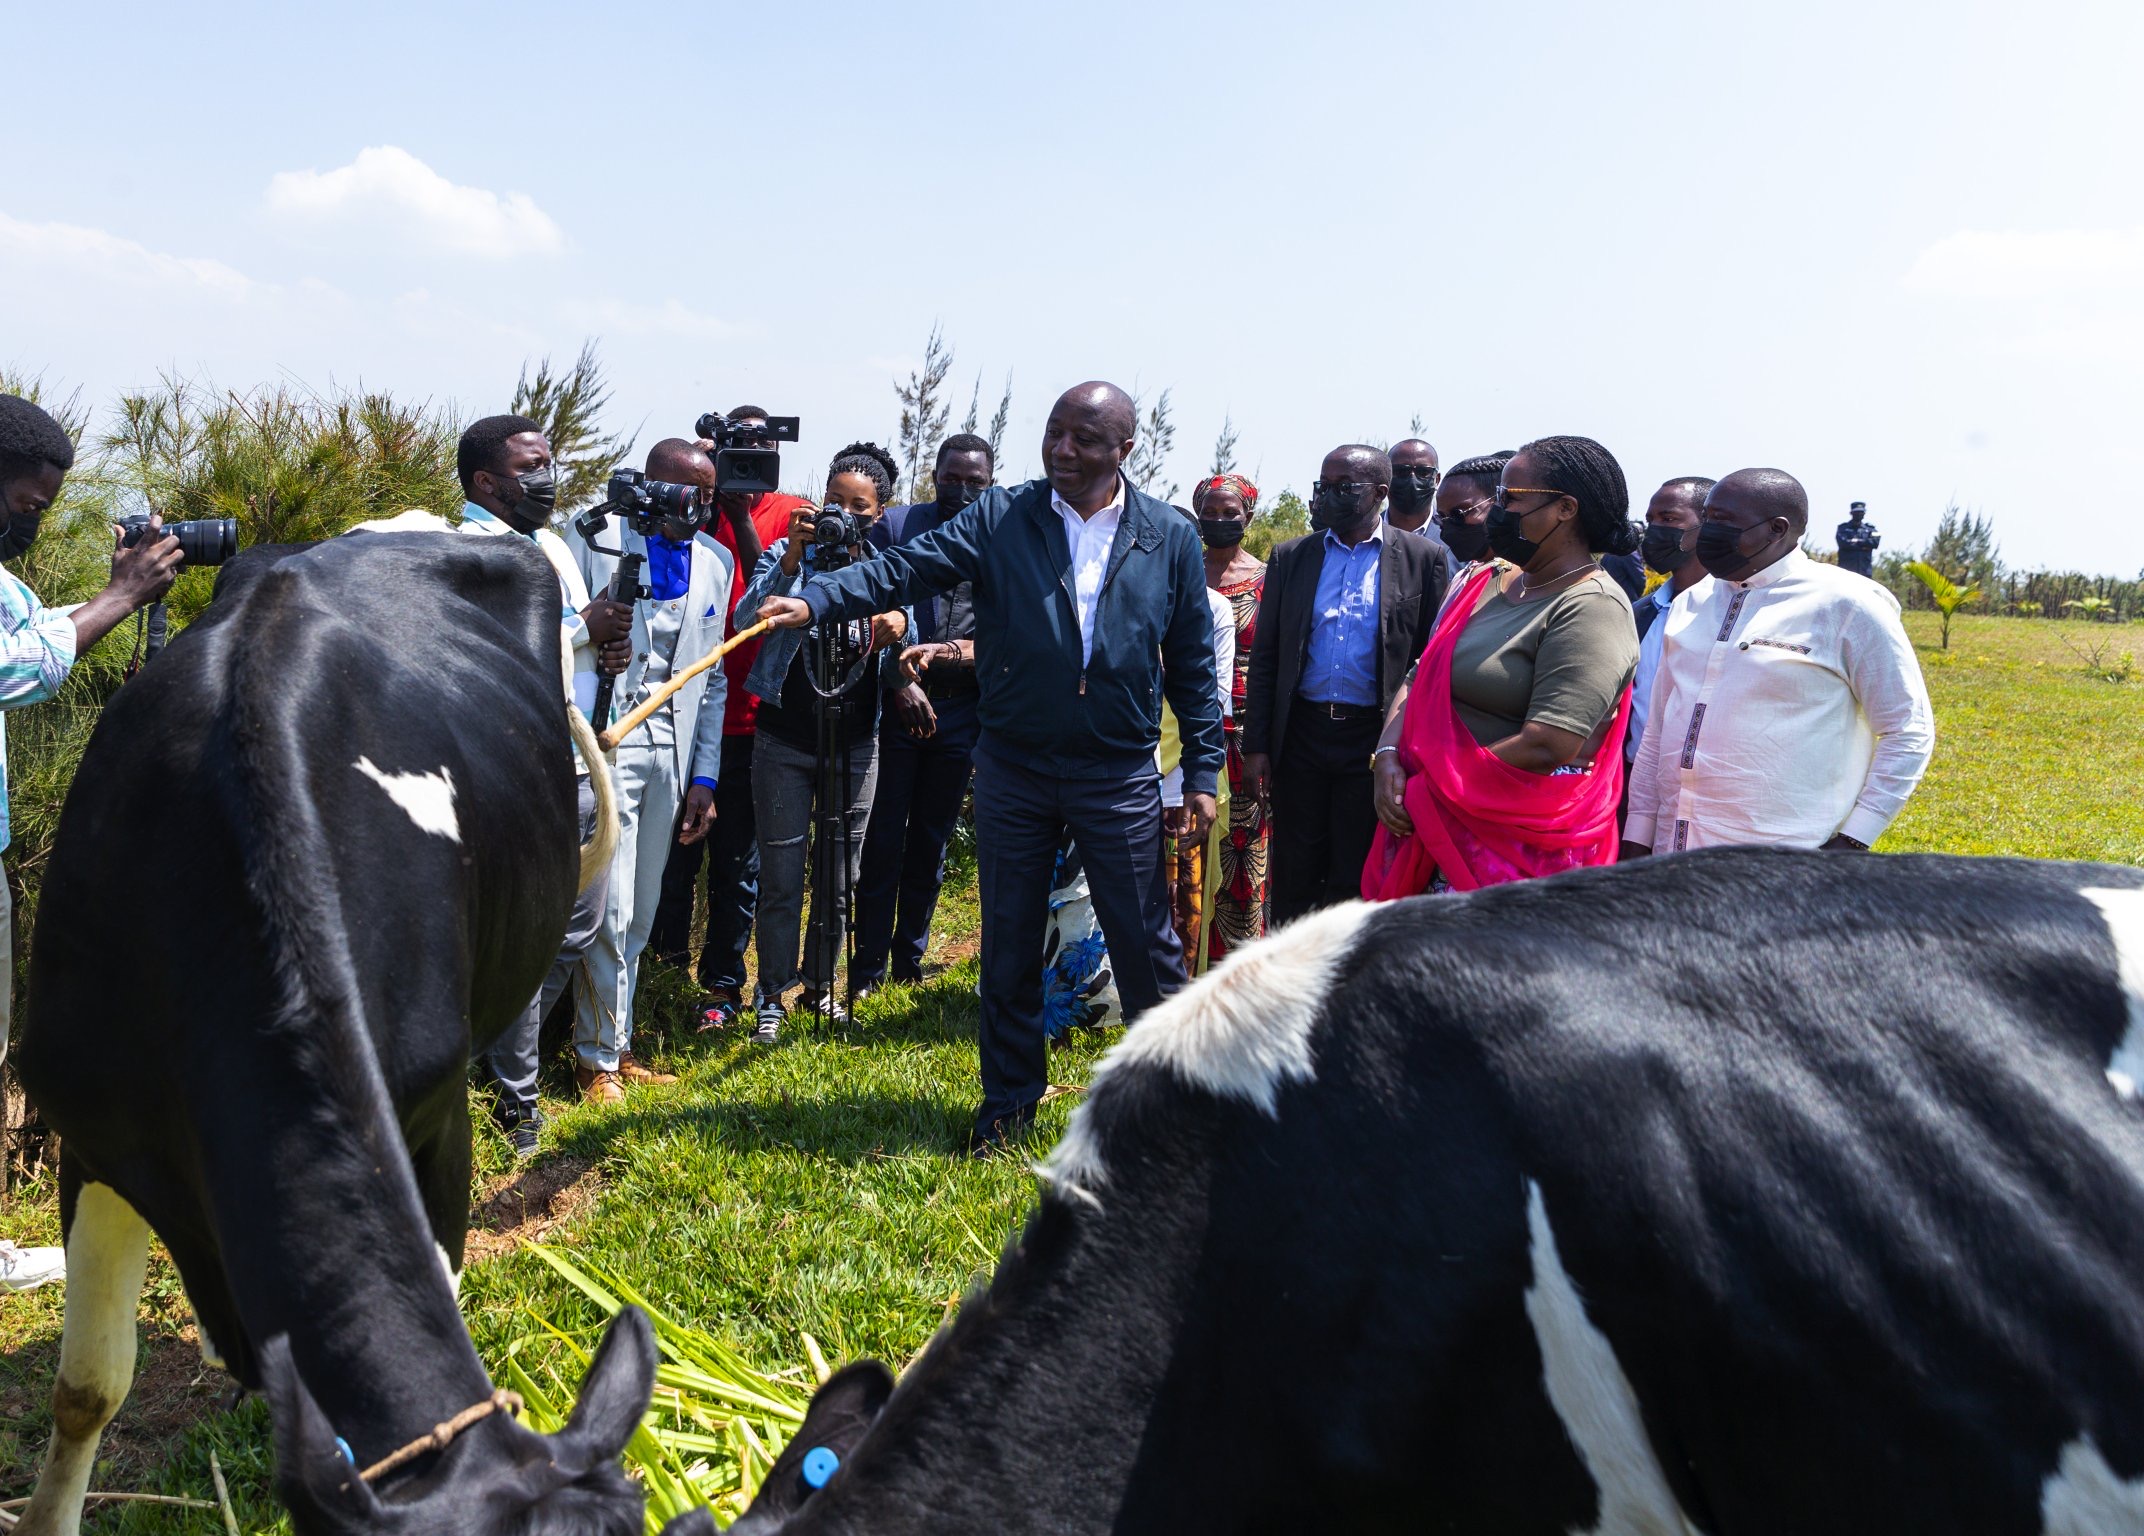 Prime Minister Edouard Ngirente gives cows to residents of Rulindo during Umuganura event on August 5. All photos by Dan Nsengiyumva